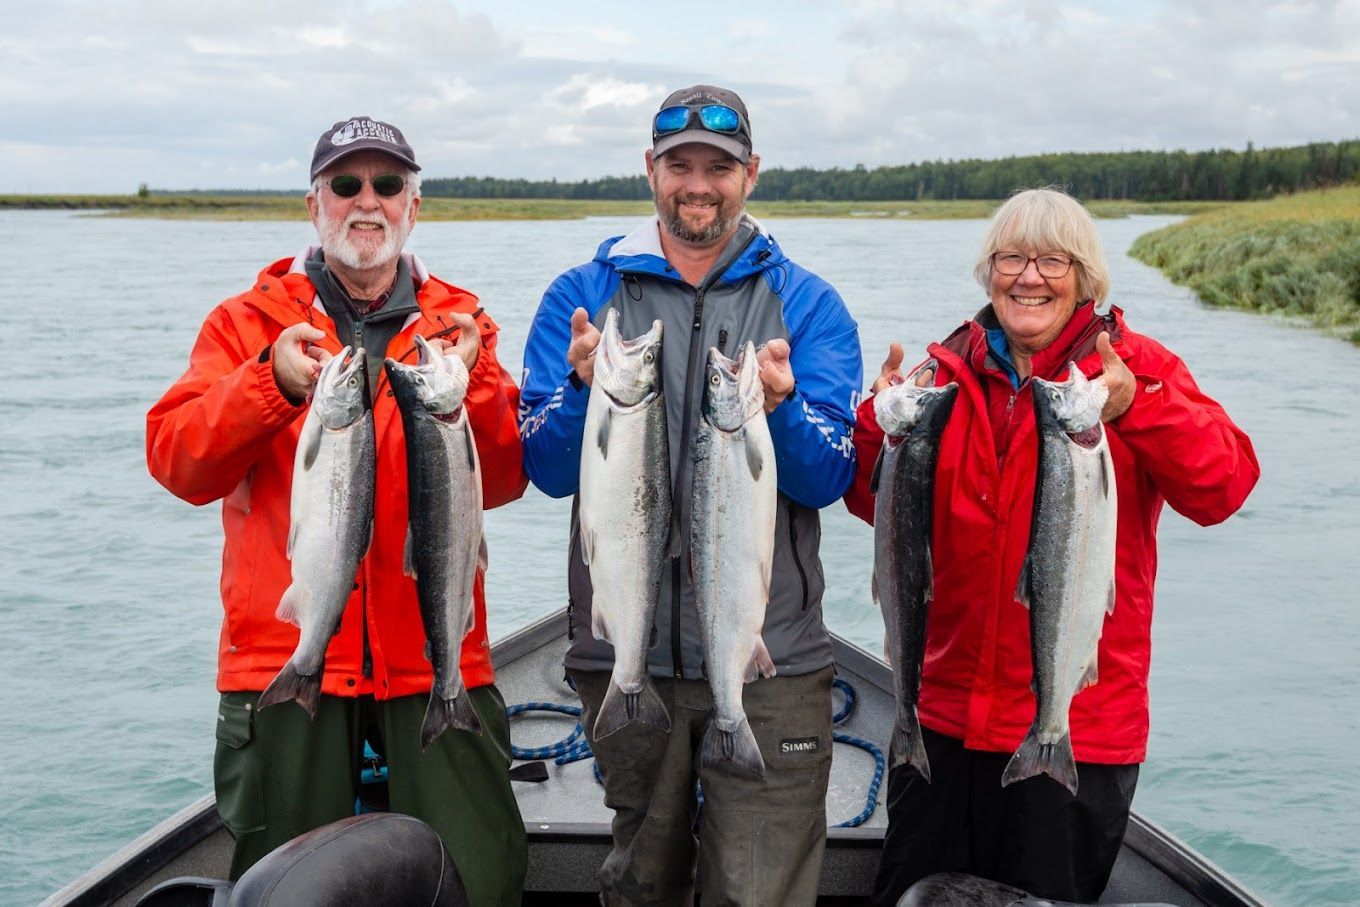 JD Roberts and clients on his fishing tour boat holding silver salmon catch